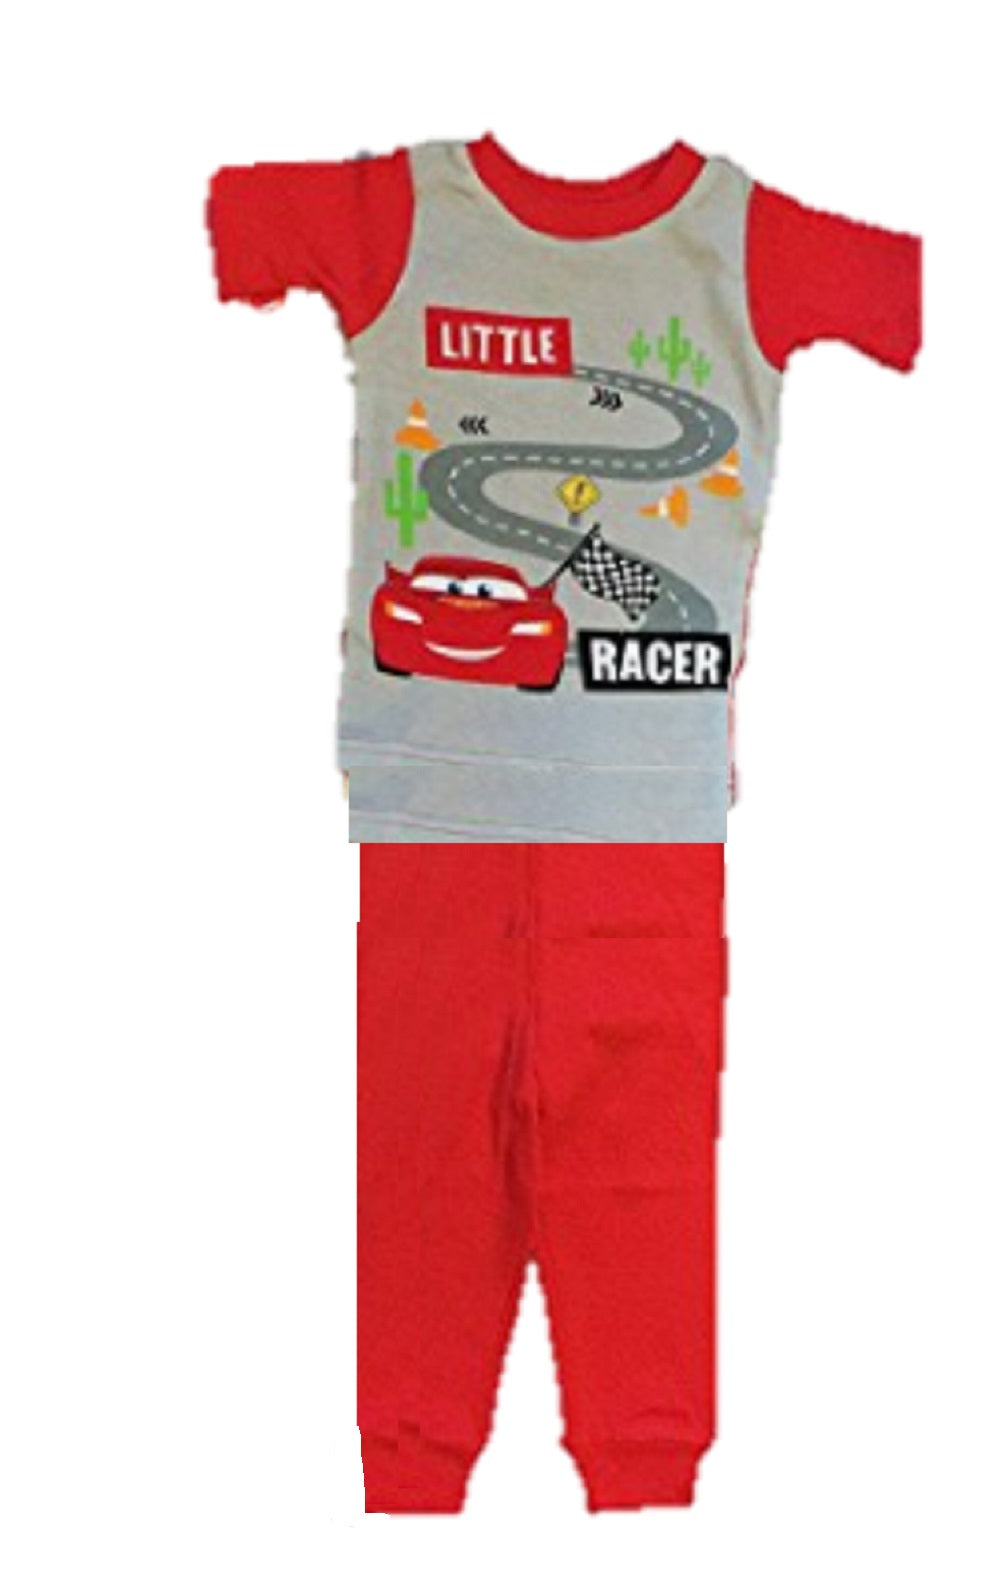 Infant and Toddler 2pc Character Pajamas - Cars Little Racer (12M)